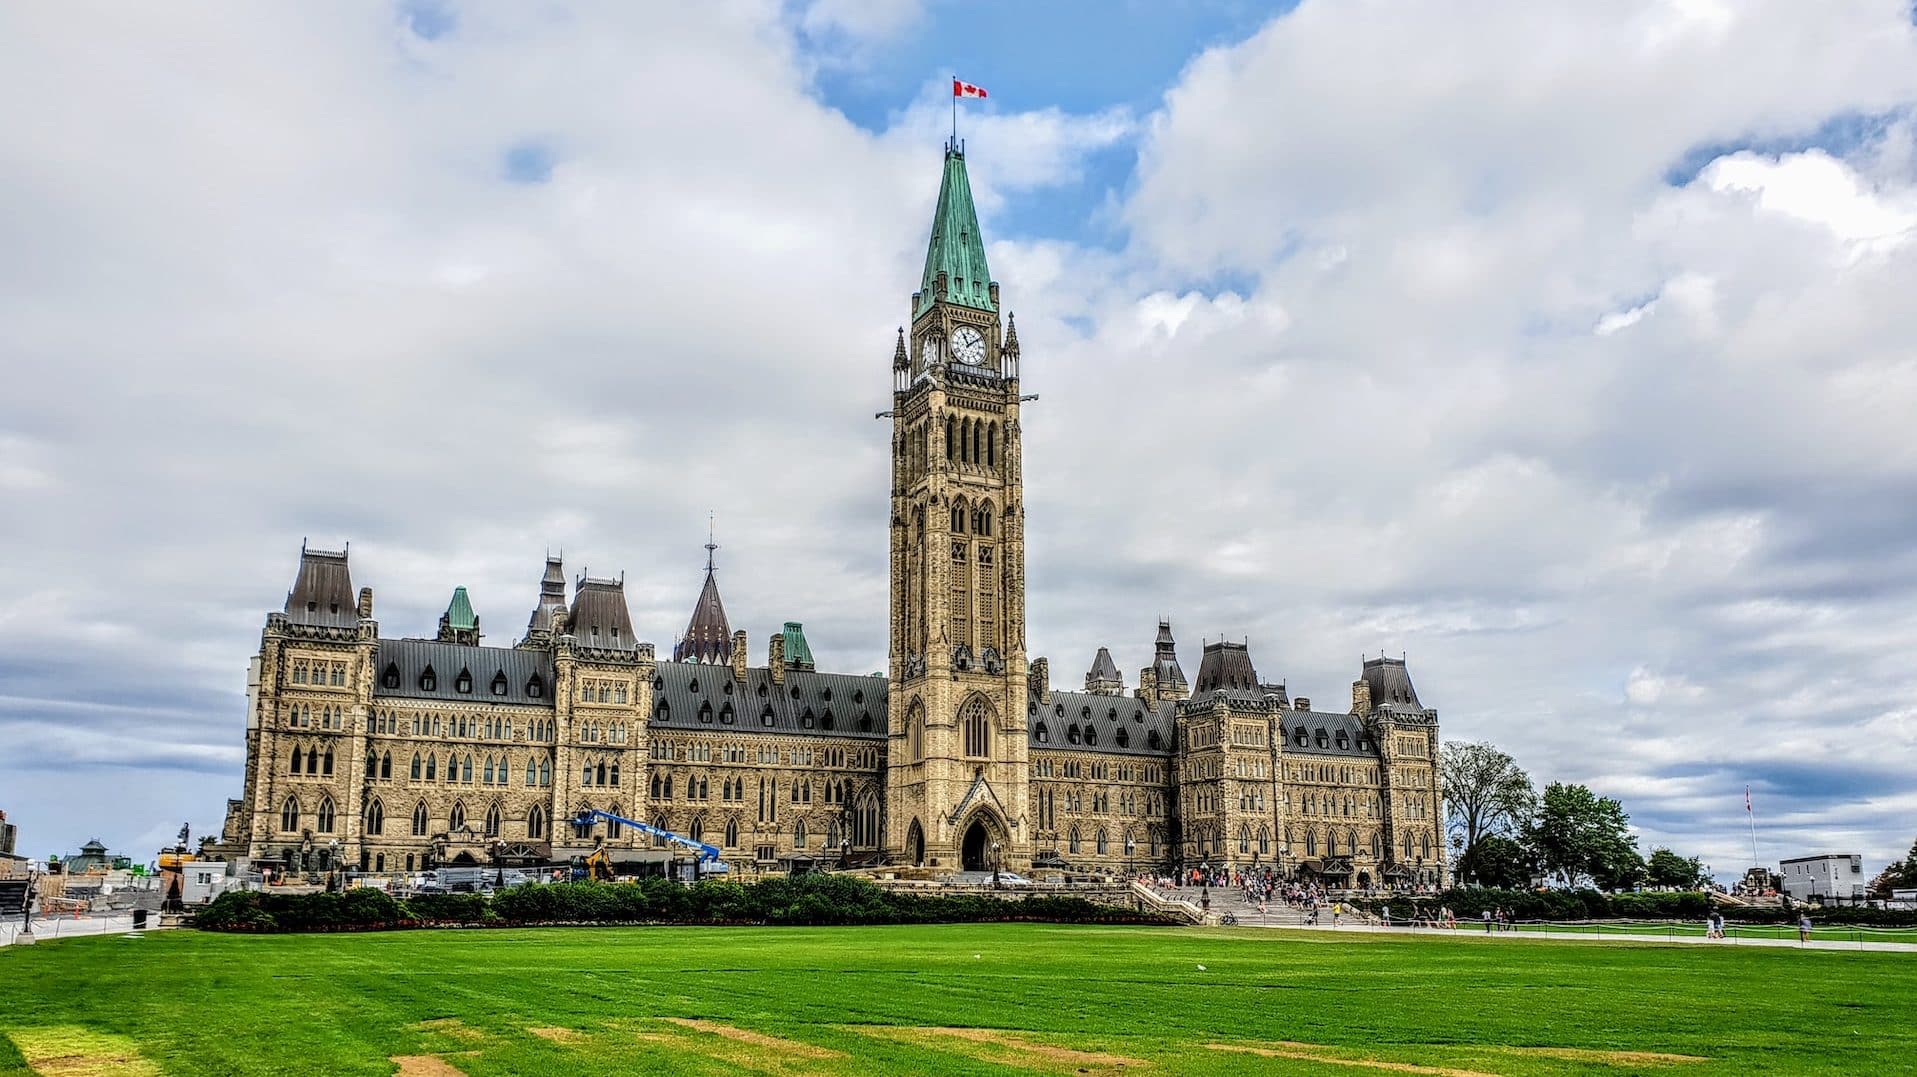 Parliament Hill is the number one attraction in Ottawa